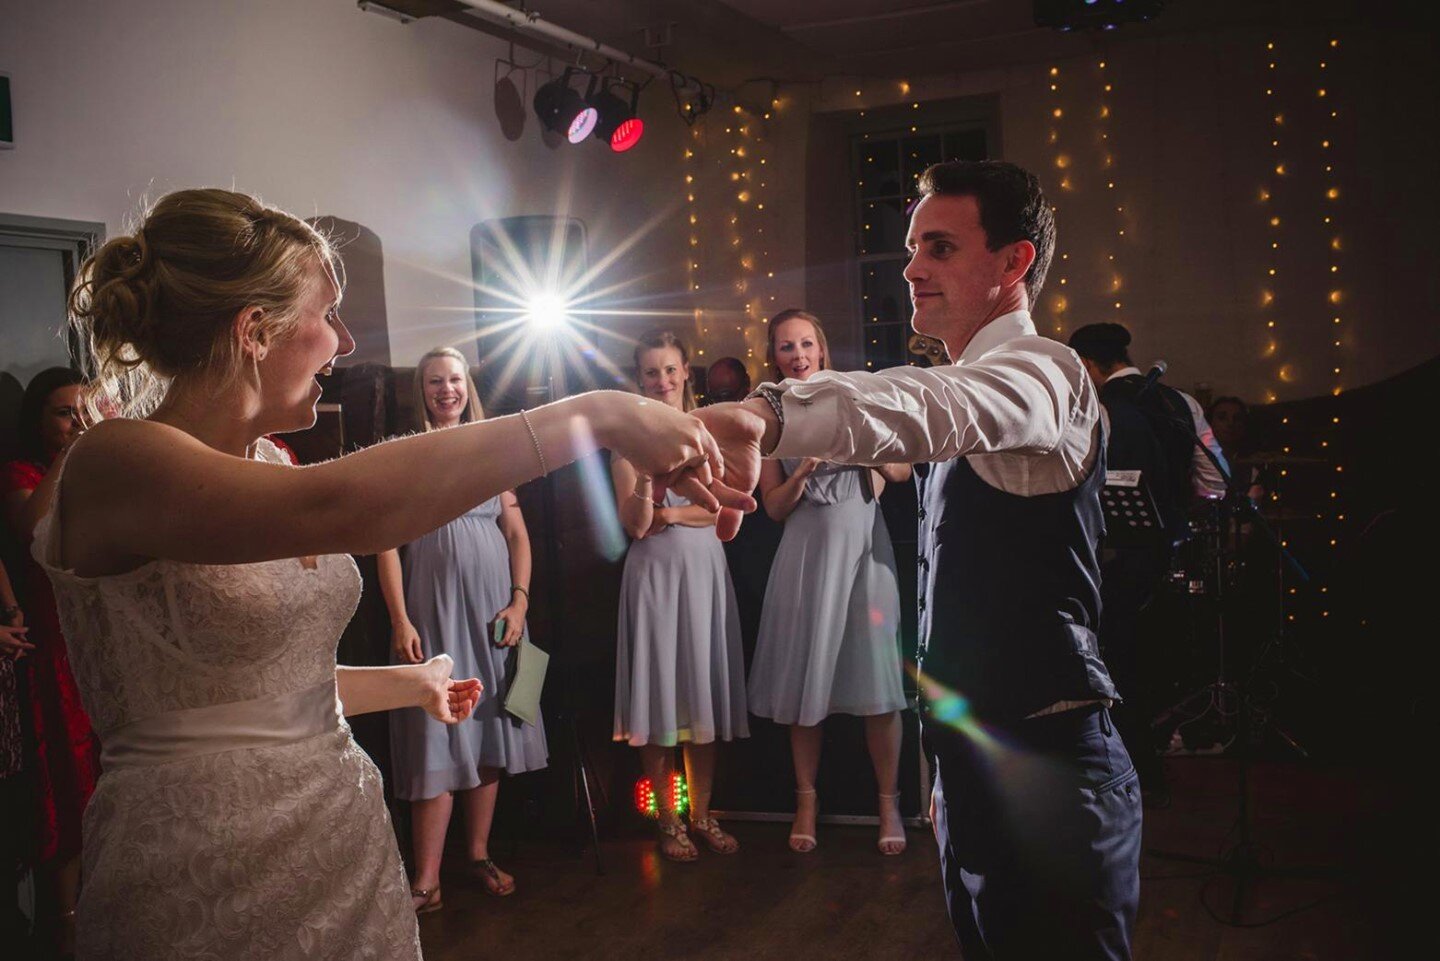 We can't wait to get you all back on the dancefloor!

Now booking for 2022 🎶

www.penfoldtheband.co.uk

#weddingband #hireaband #theshowmustgoon